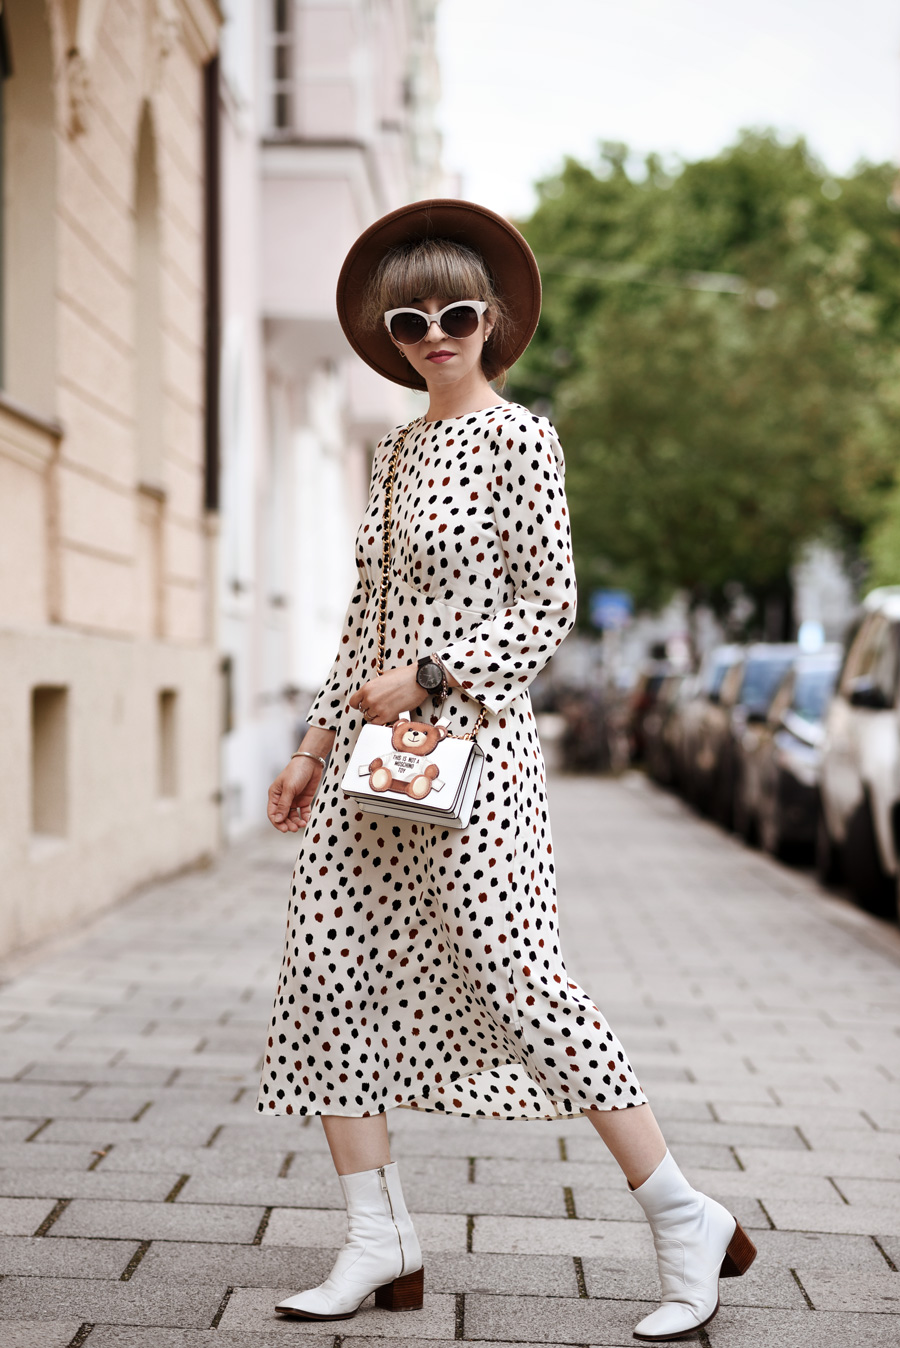 gepunktetes-kleid-midi-dress-fashionblogger-modeblogger-muenchen-style-punkte-dots-moschino-toy-streetstyle